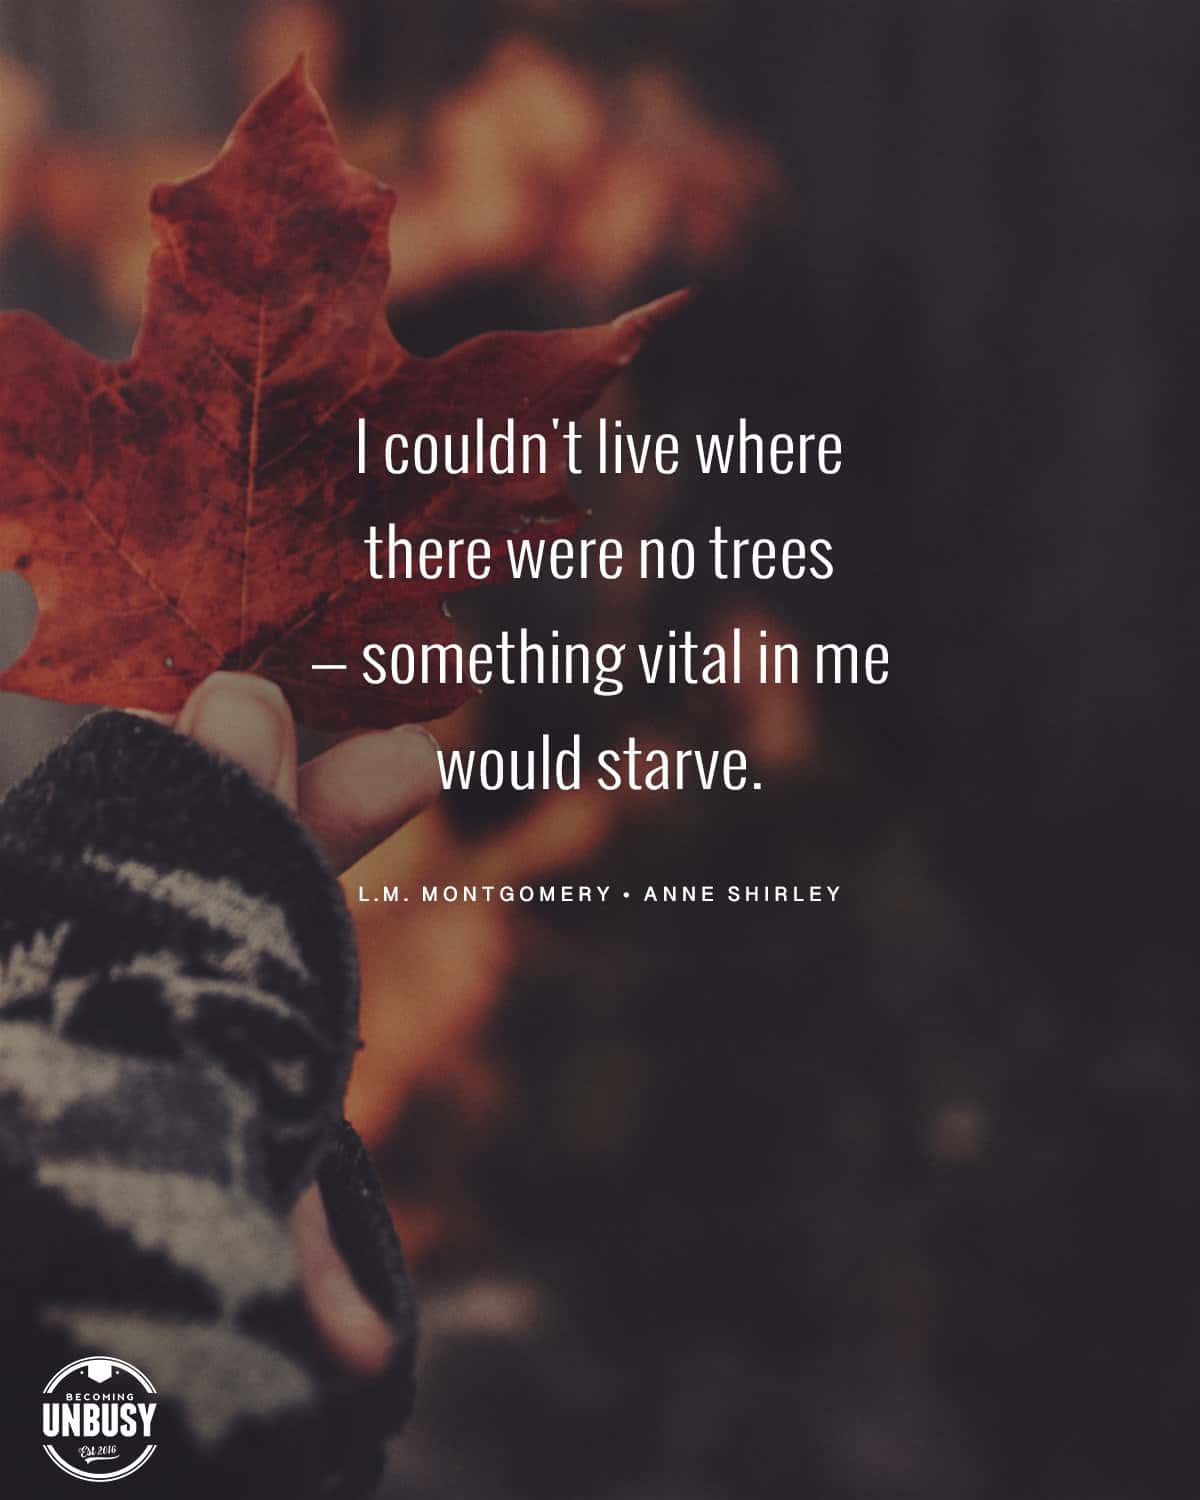 The following fall bucket list quote written over a photo of a woman wearing a chunky autumn sweater holding a single fall leaf, "I couldn't live where there were no trees — something vital in me would starve."